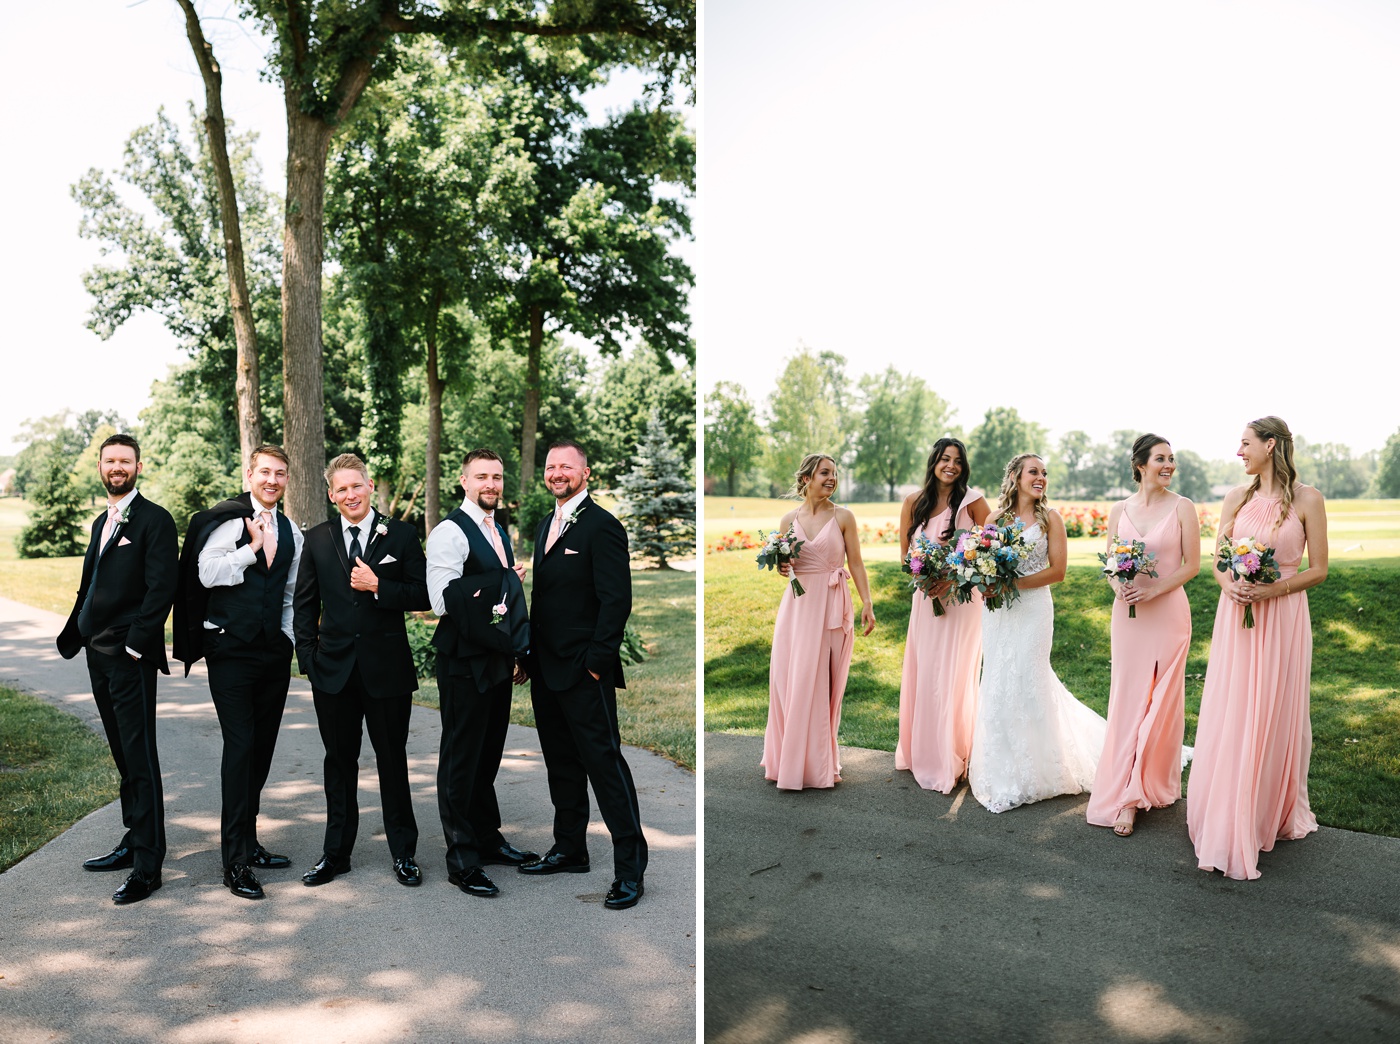 Bridal party portraits at Harbour Trees Golf and Beach Club